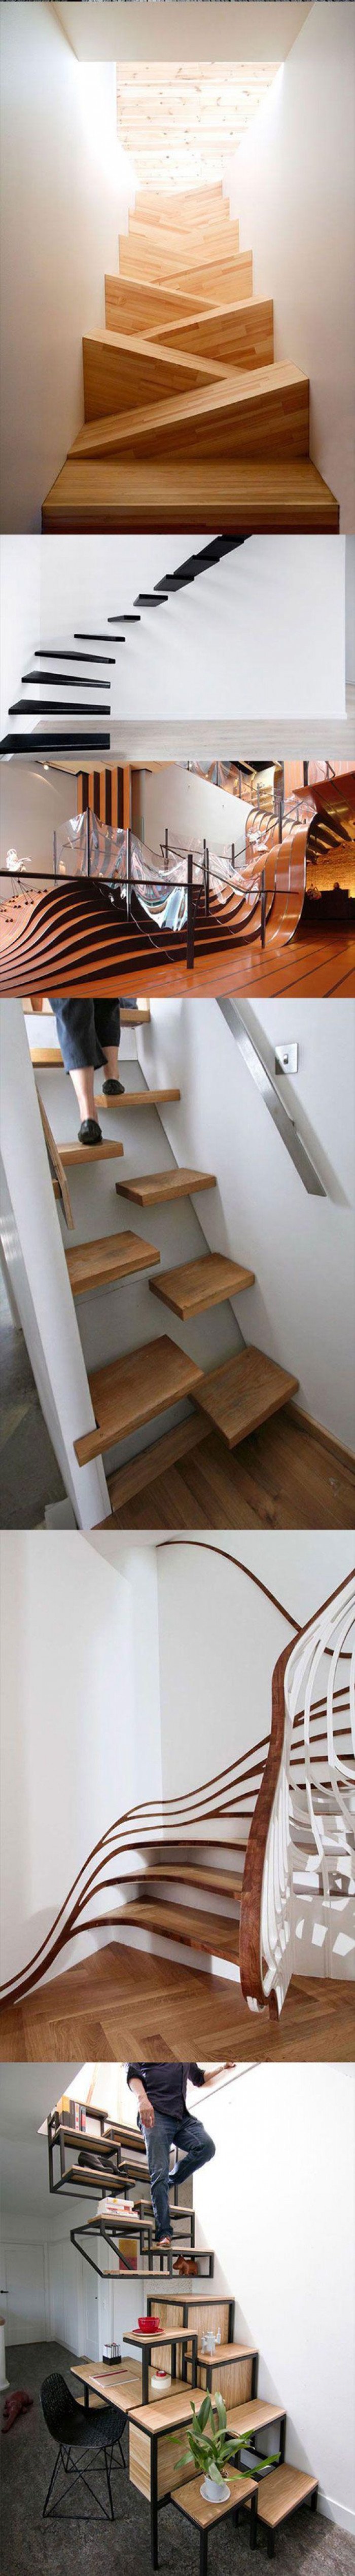 Cool Stair Designs That Will Inspire You